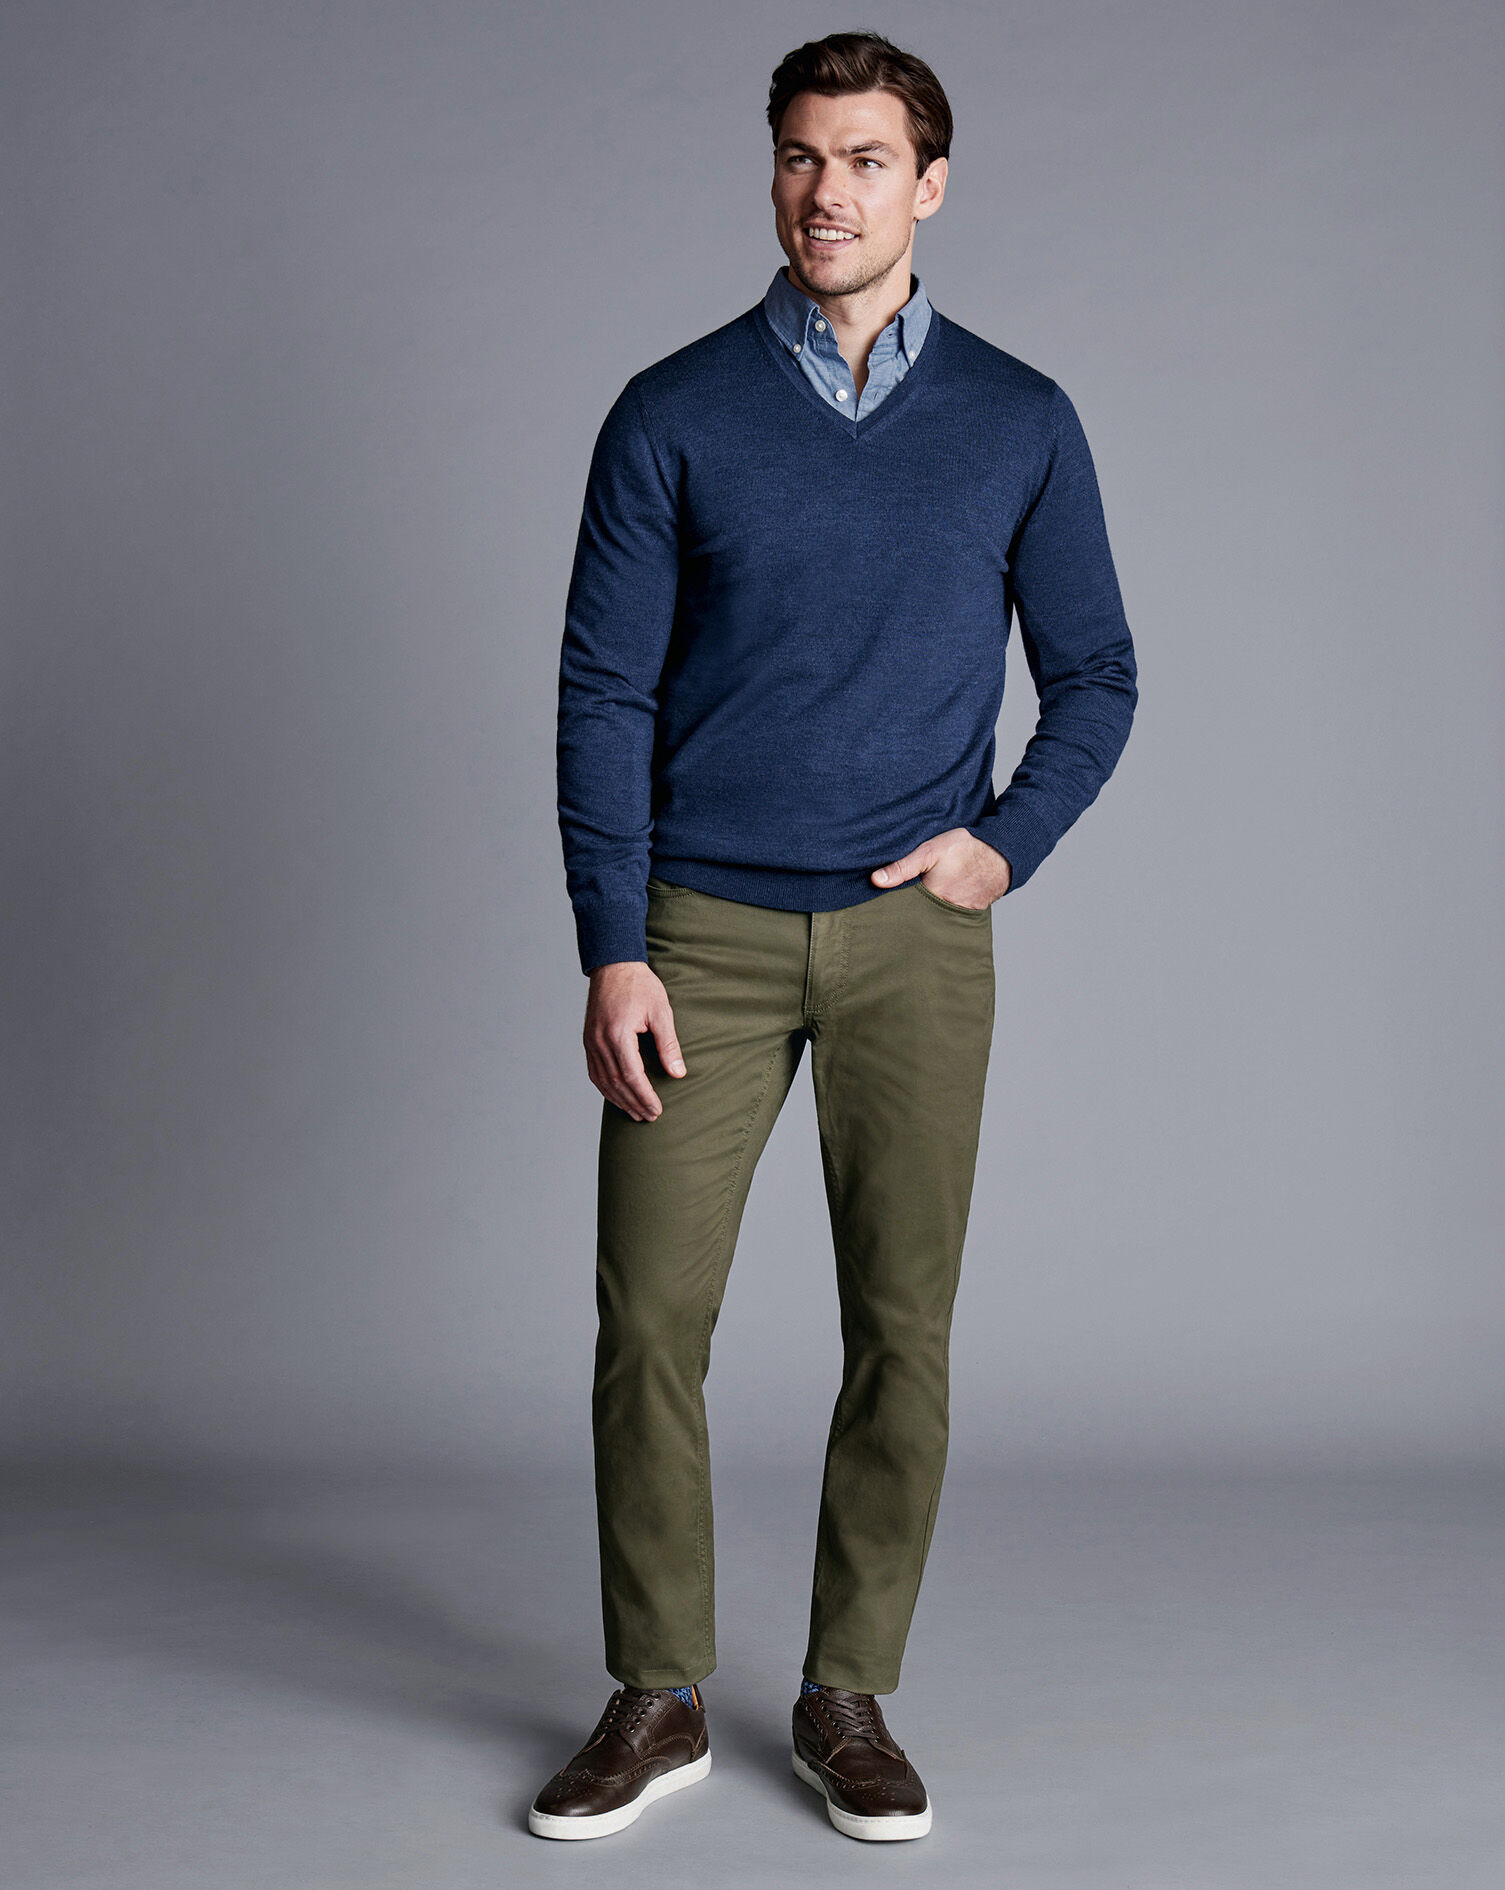 How to Style Navy Blue Dress Pants